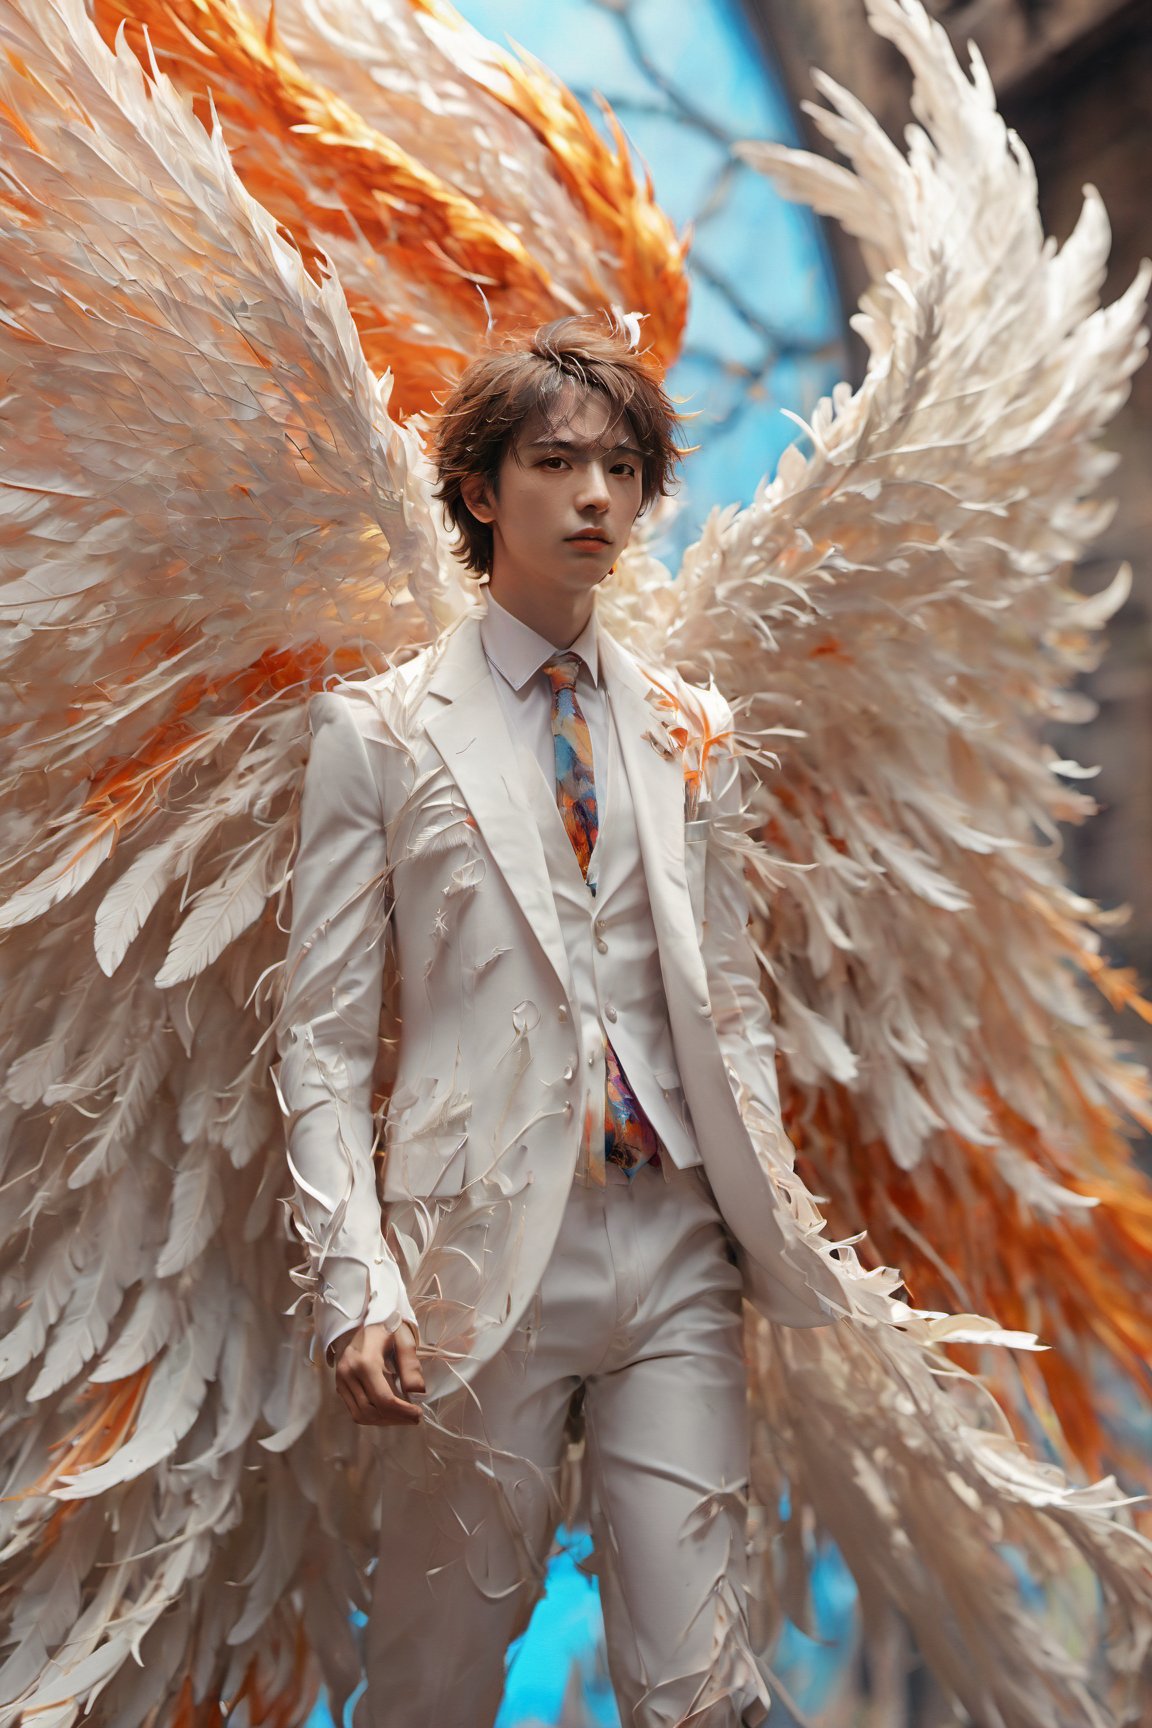 Create an image of a young man wearing a suit, featuring vibrant, white wings extending from his back. Random movement The background should be plain white, emphasizing the contrast and detailing of the beauty wings and the sharpness of the suit. The man should appear poised and elegant, with the wings unfurled to showcase a spectrum of vivid hues, blending seamlessly from one color to another. The focus should be on the meticulous details of the wings’ feathers and the suit’s fabric, capturing a harmonious blend of natural and refined elements, wings,Stylish, close up,l3min,xxmixgirl,fire element,wings,ice and water